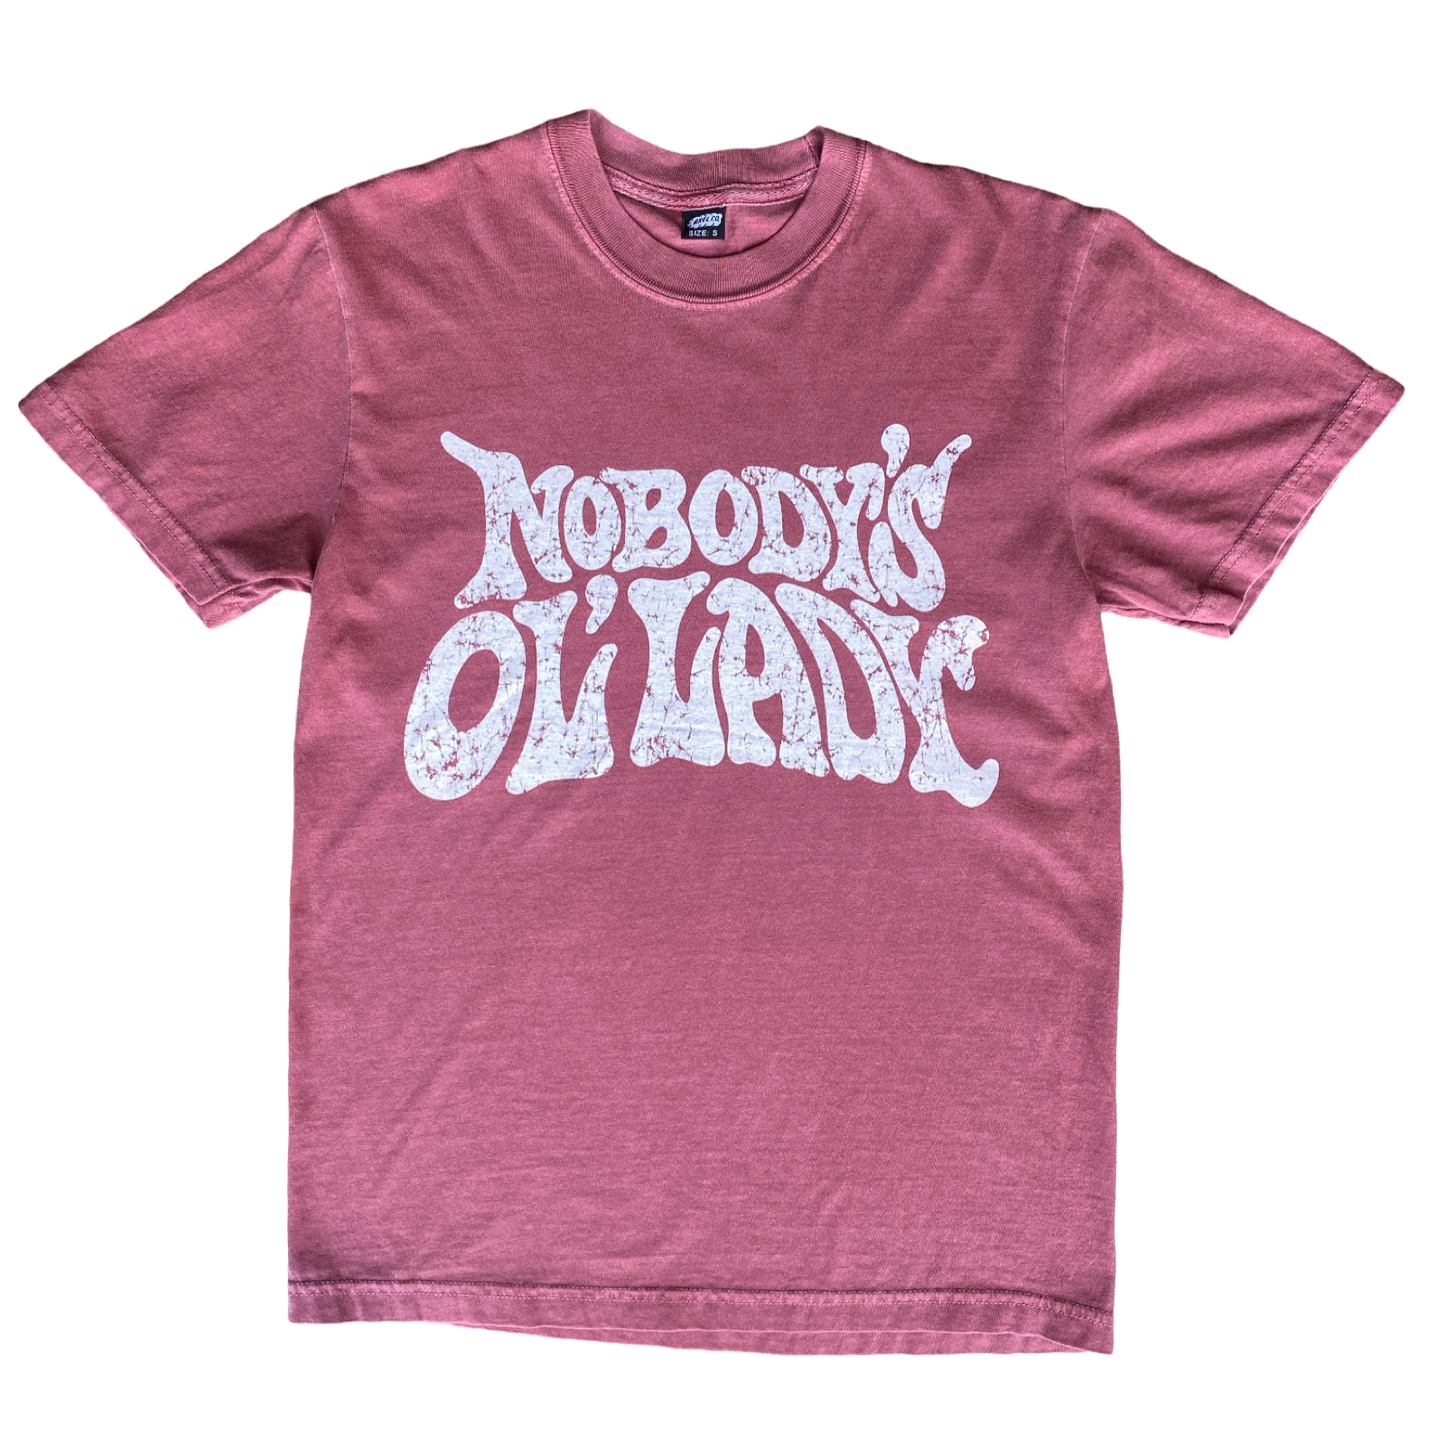 Axel Co  "Nobody's Ol' Lady"  Motorcycle T-Shirt